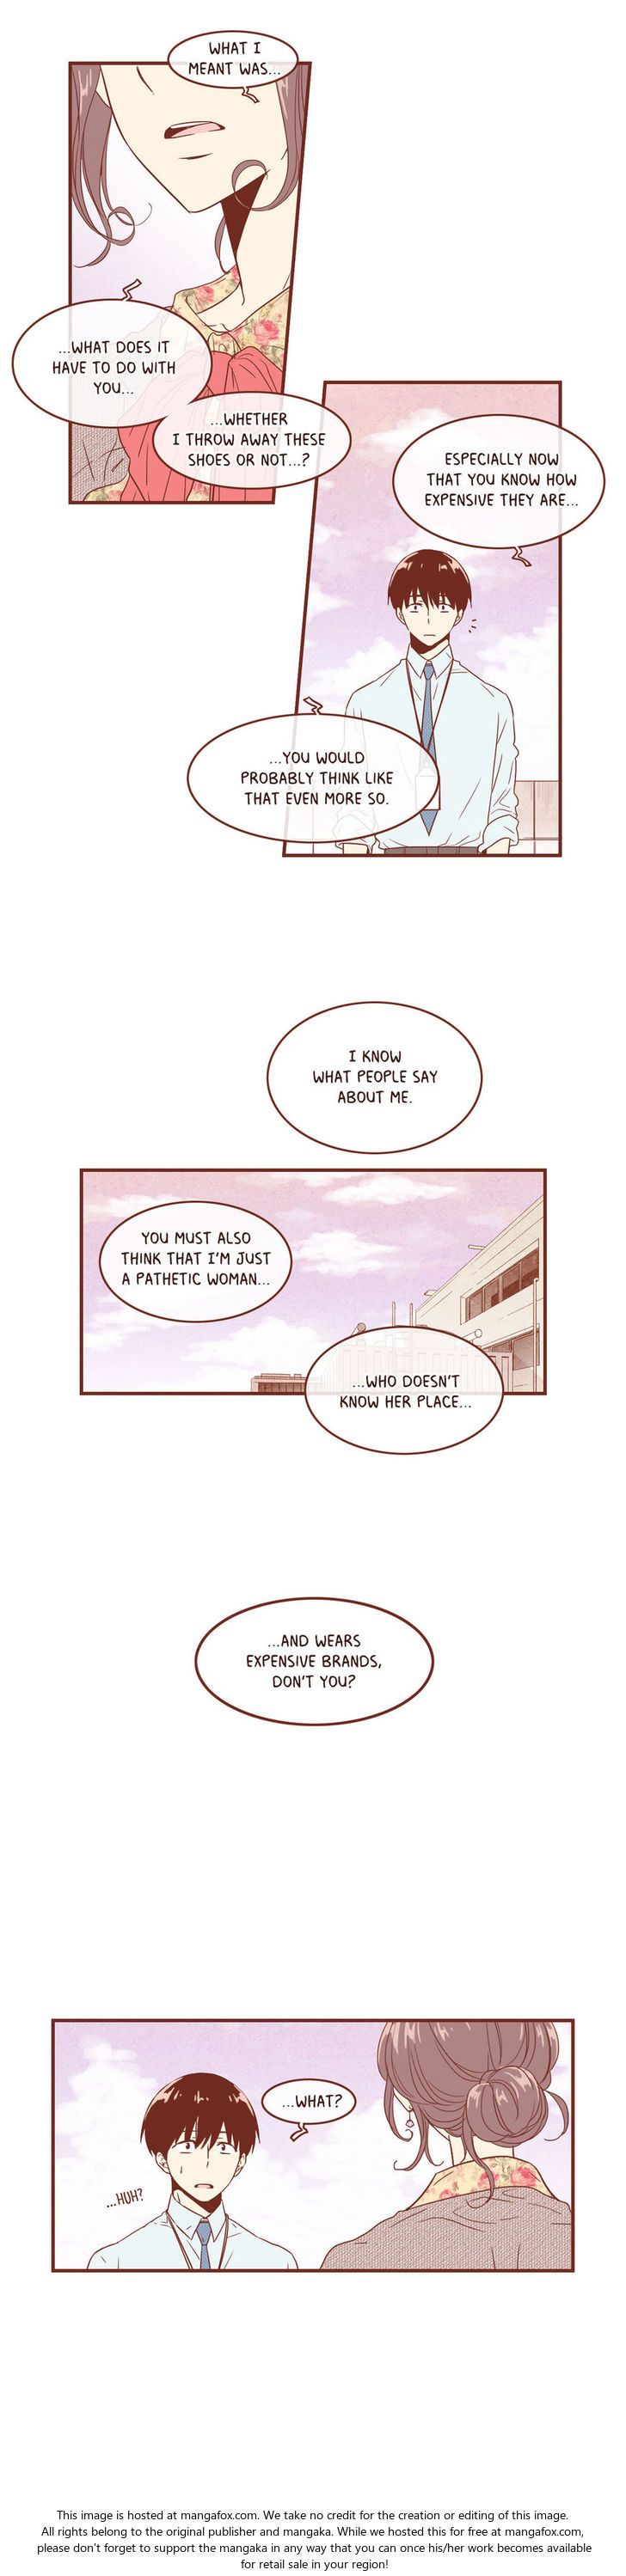 Why Did Men Stop Wearing High Heels? Chapter 040 page 7